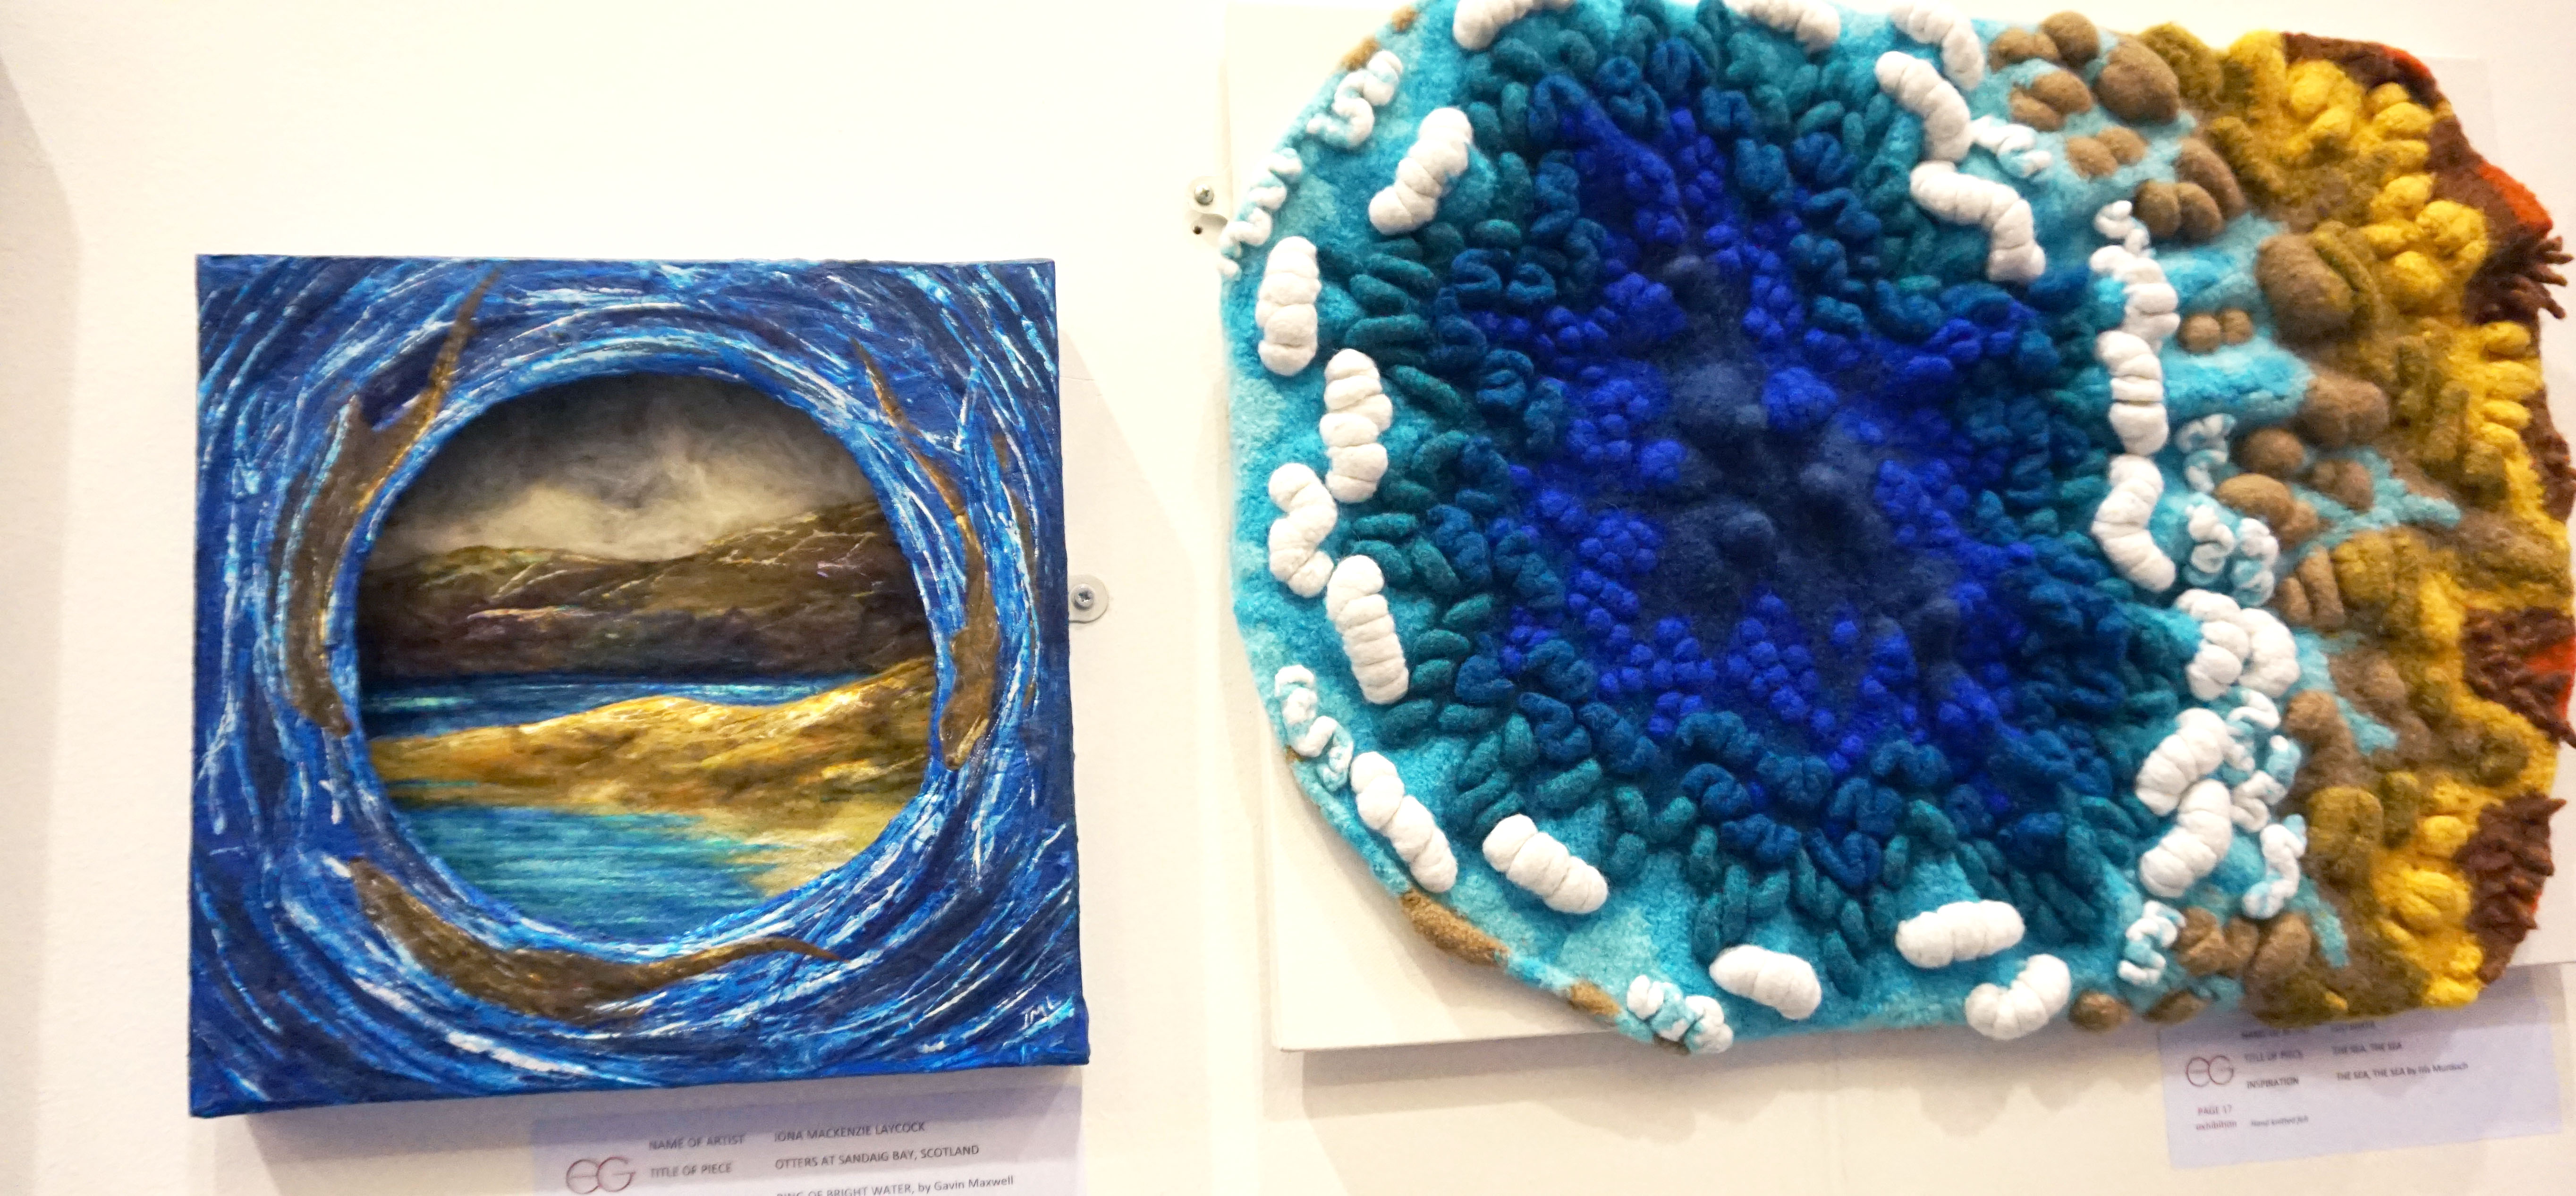 Blue textile art at the Knitting and Stitching Show at Ally Pally 2017